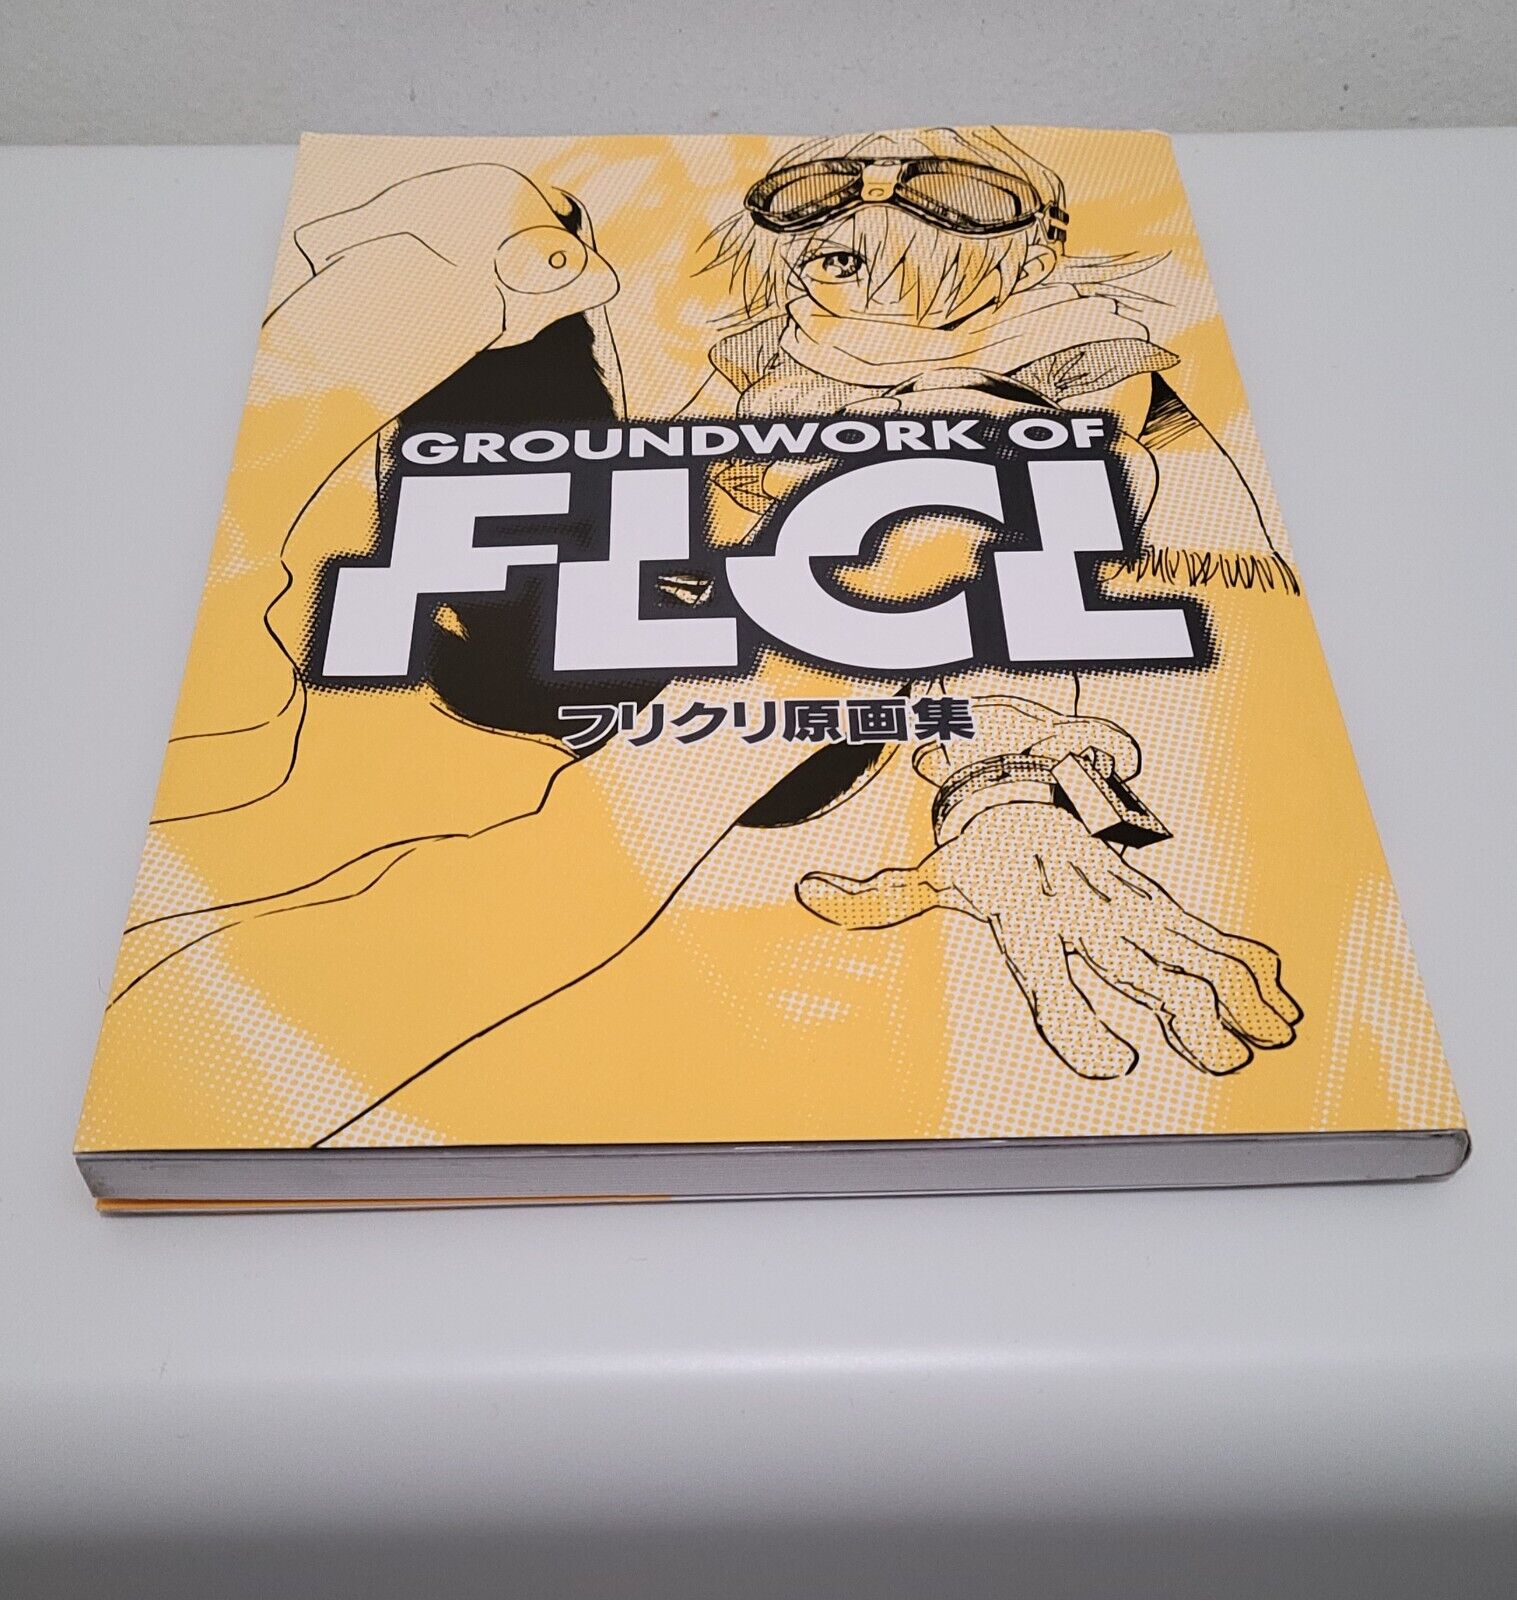 Groundwork of FLCL, Art & Illustrations from the Anime